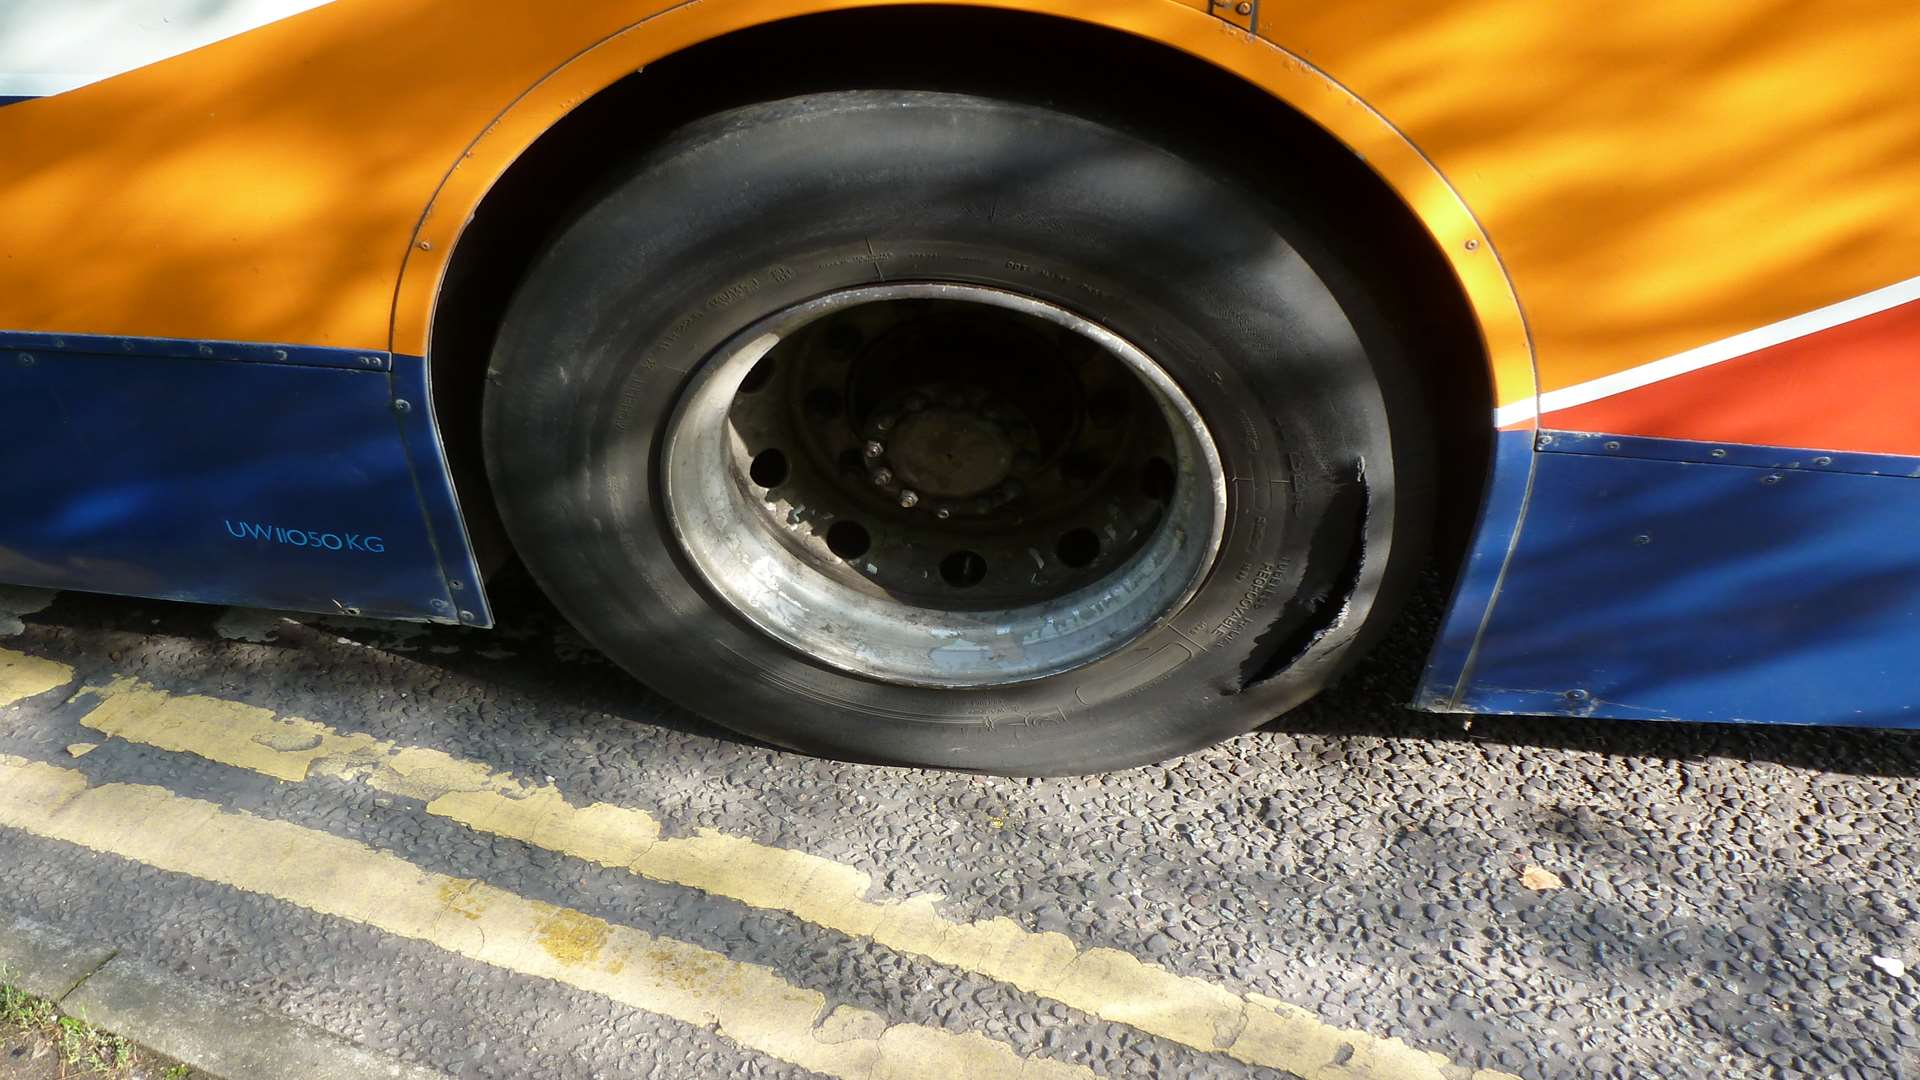 The damaged tyre after the explosion in Edinburgh Road, Ashford